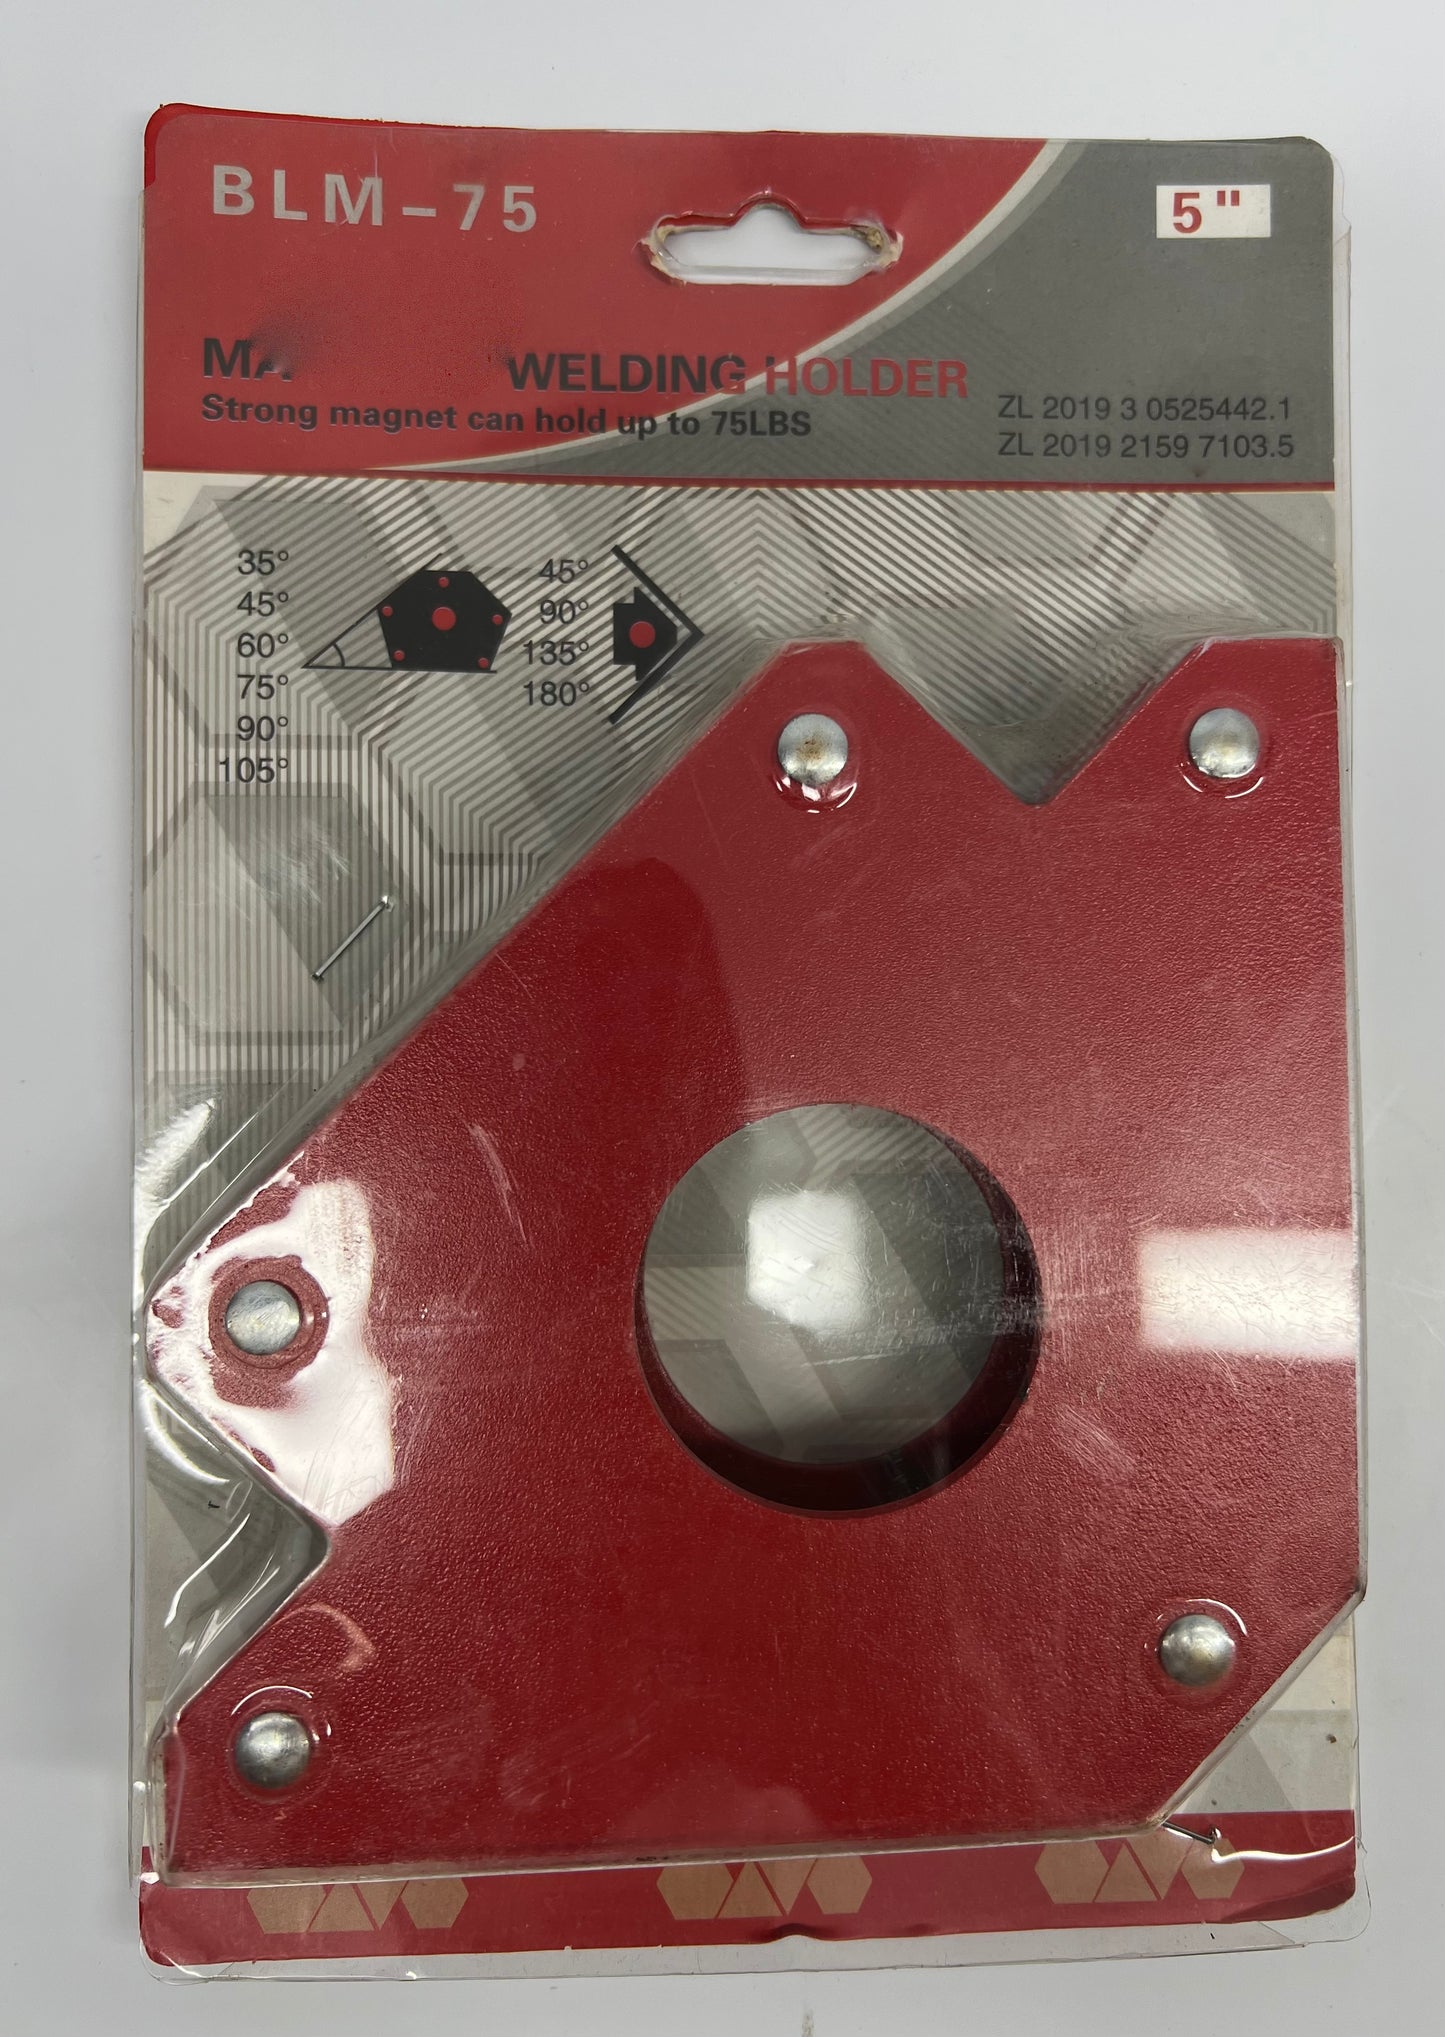 Magnetic Welding Clamp 5"